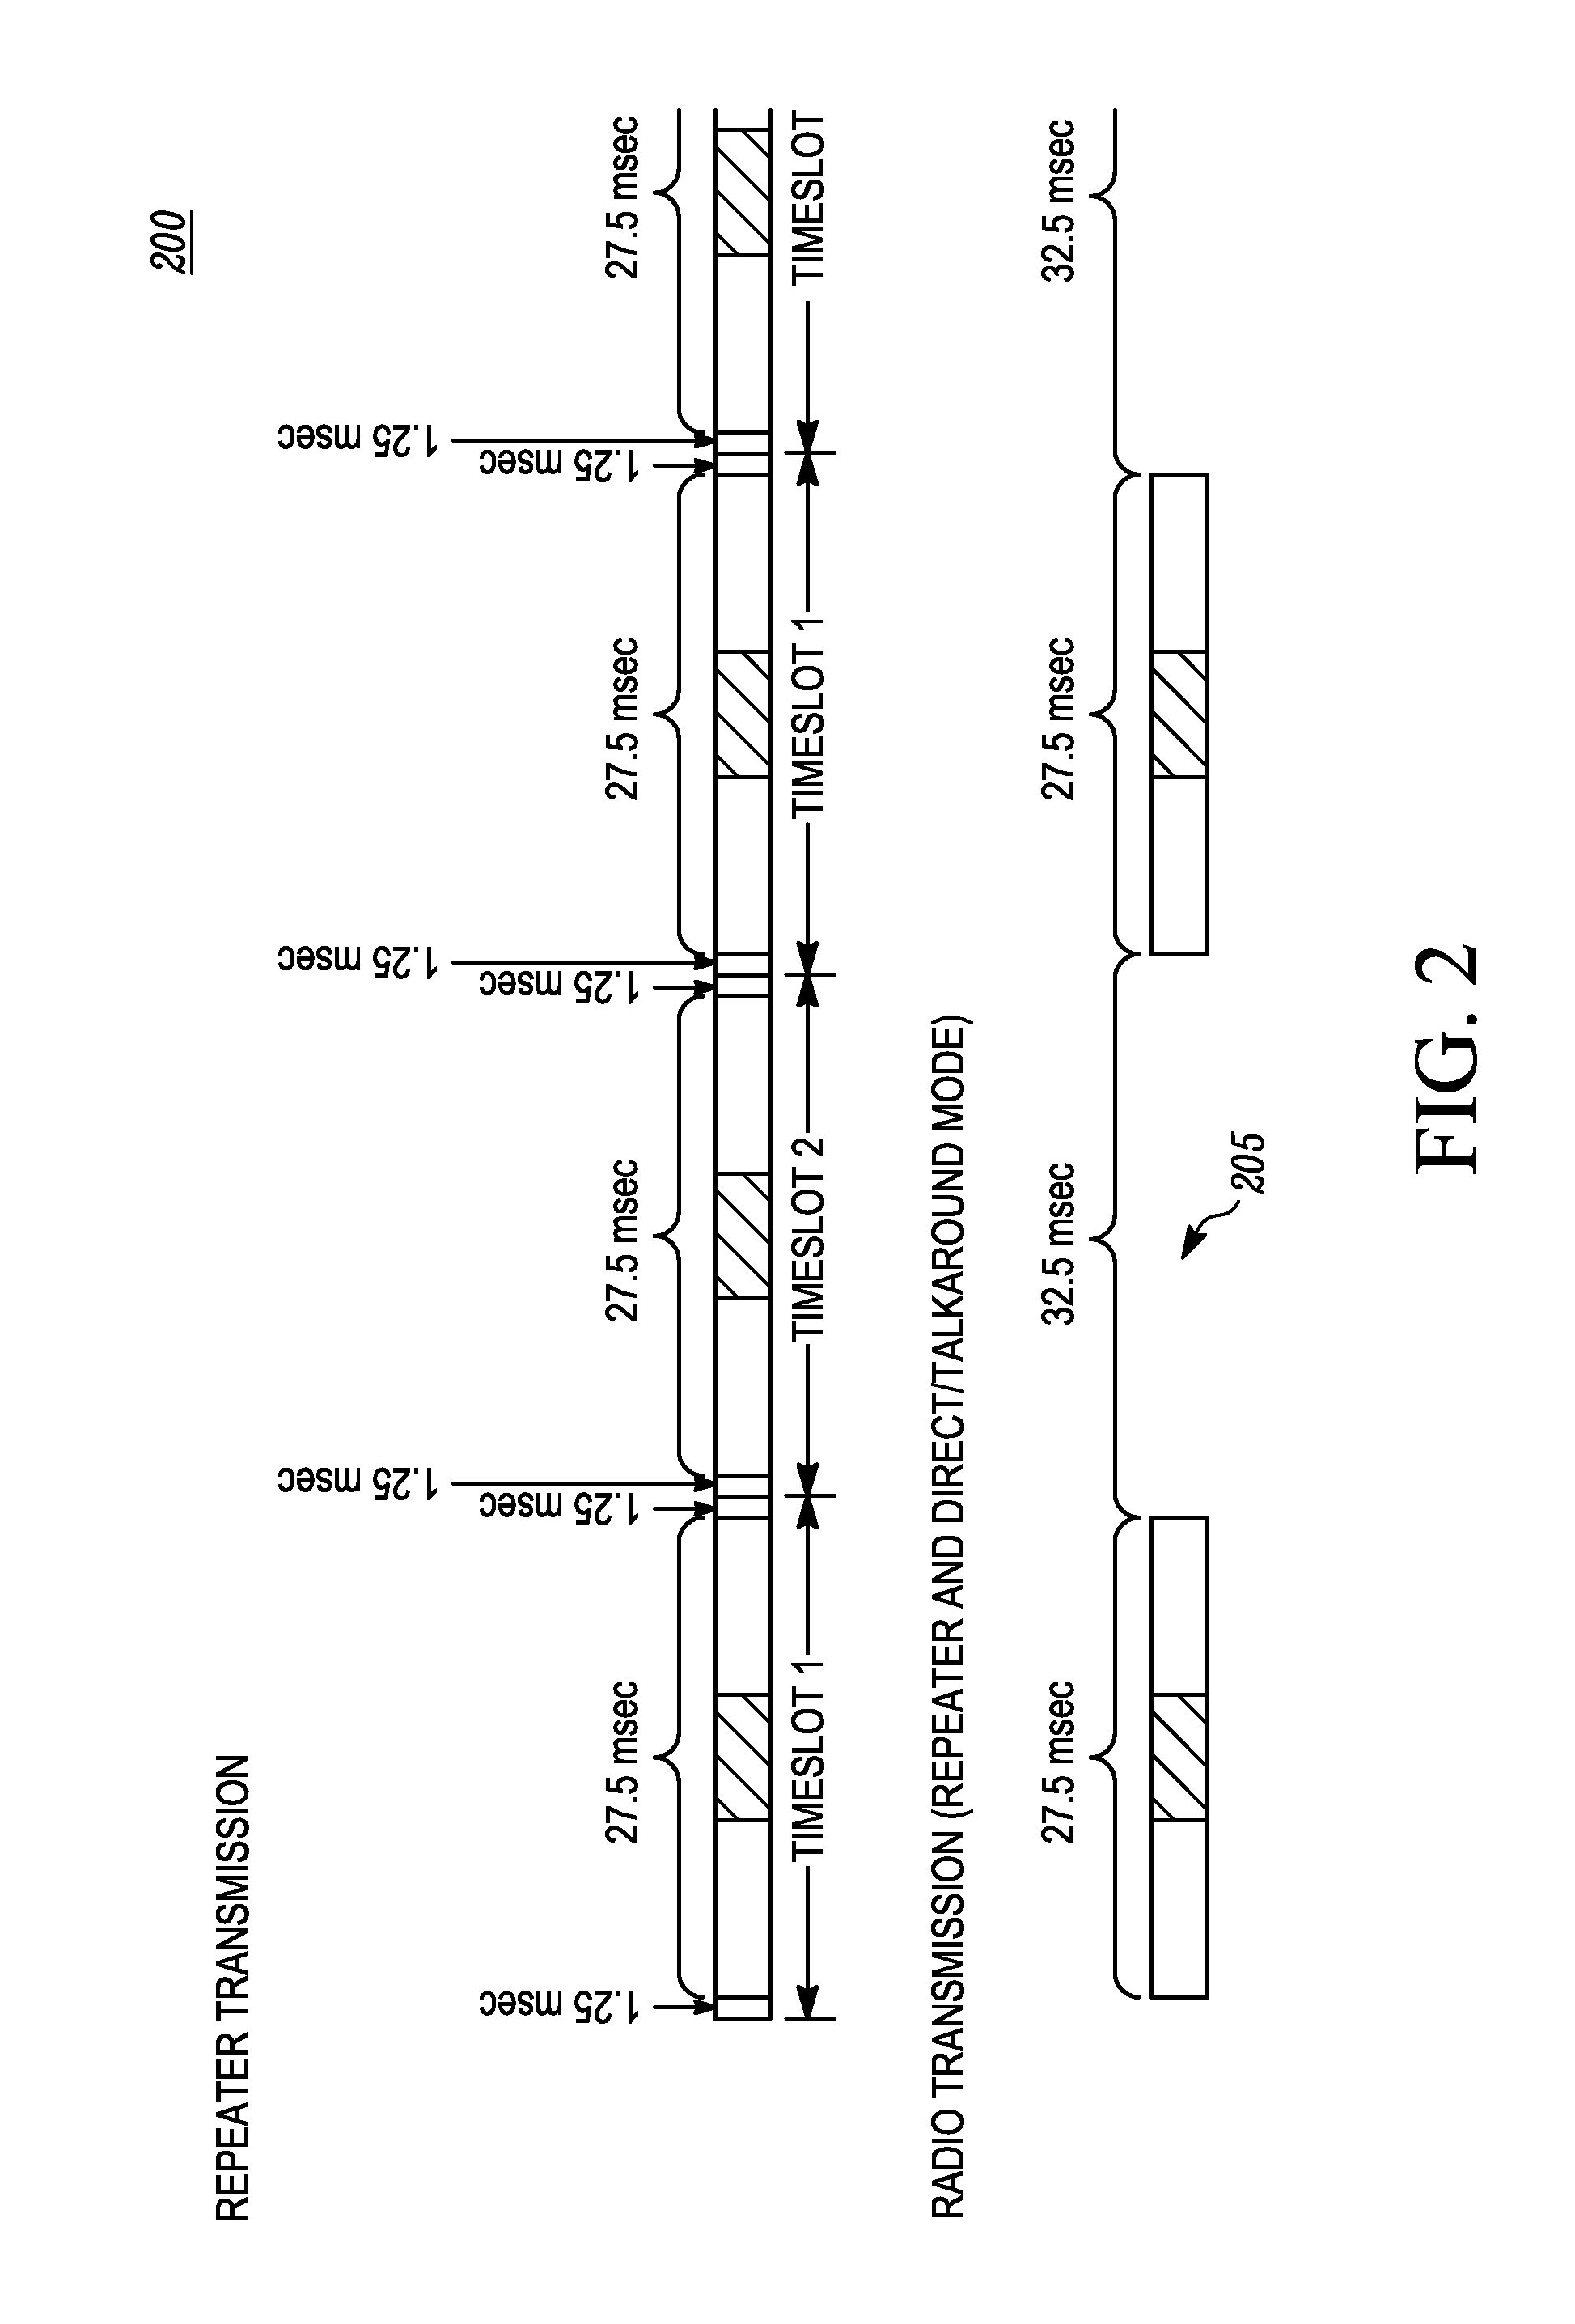 Method for synchronizing direct mode time division multiple access (TDMA) transmissions